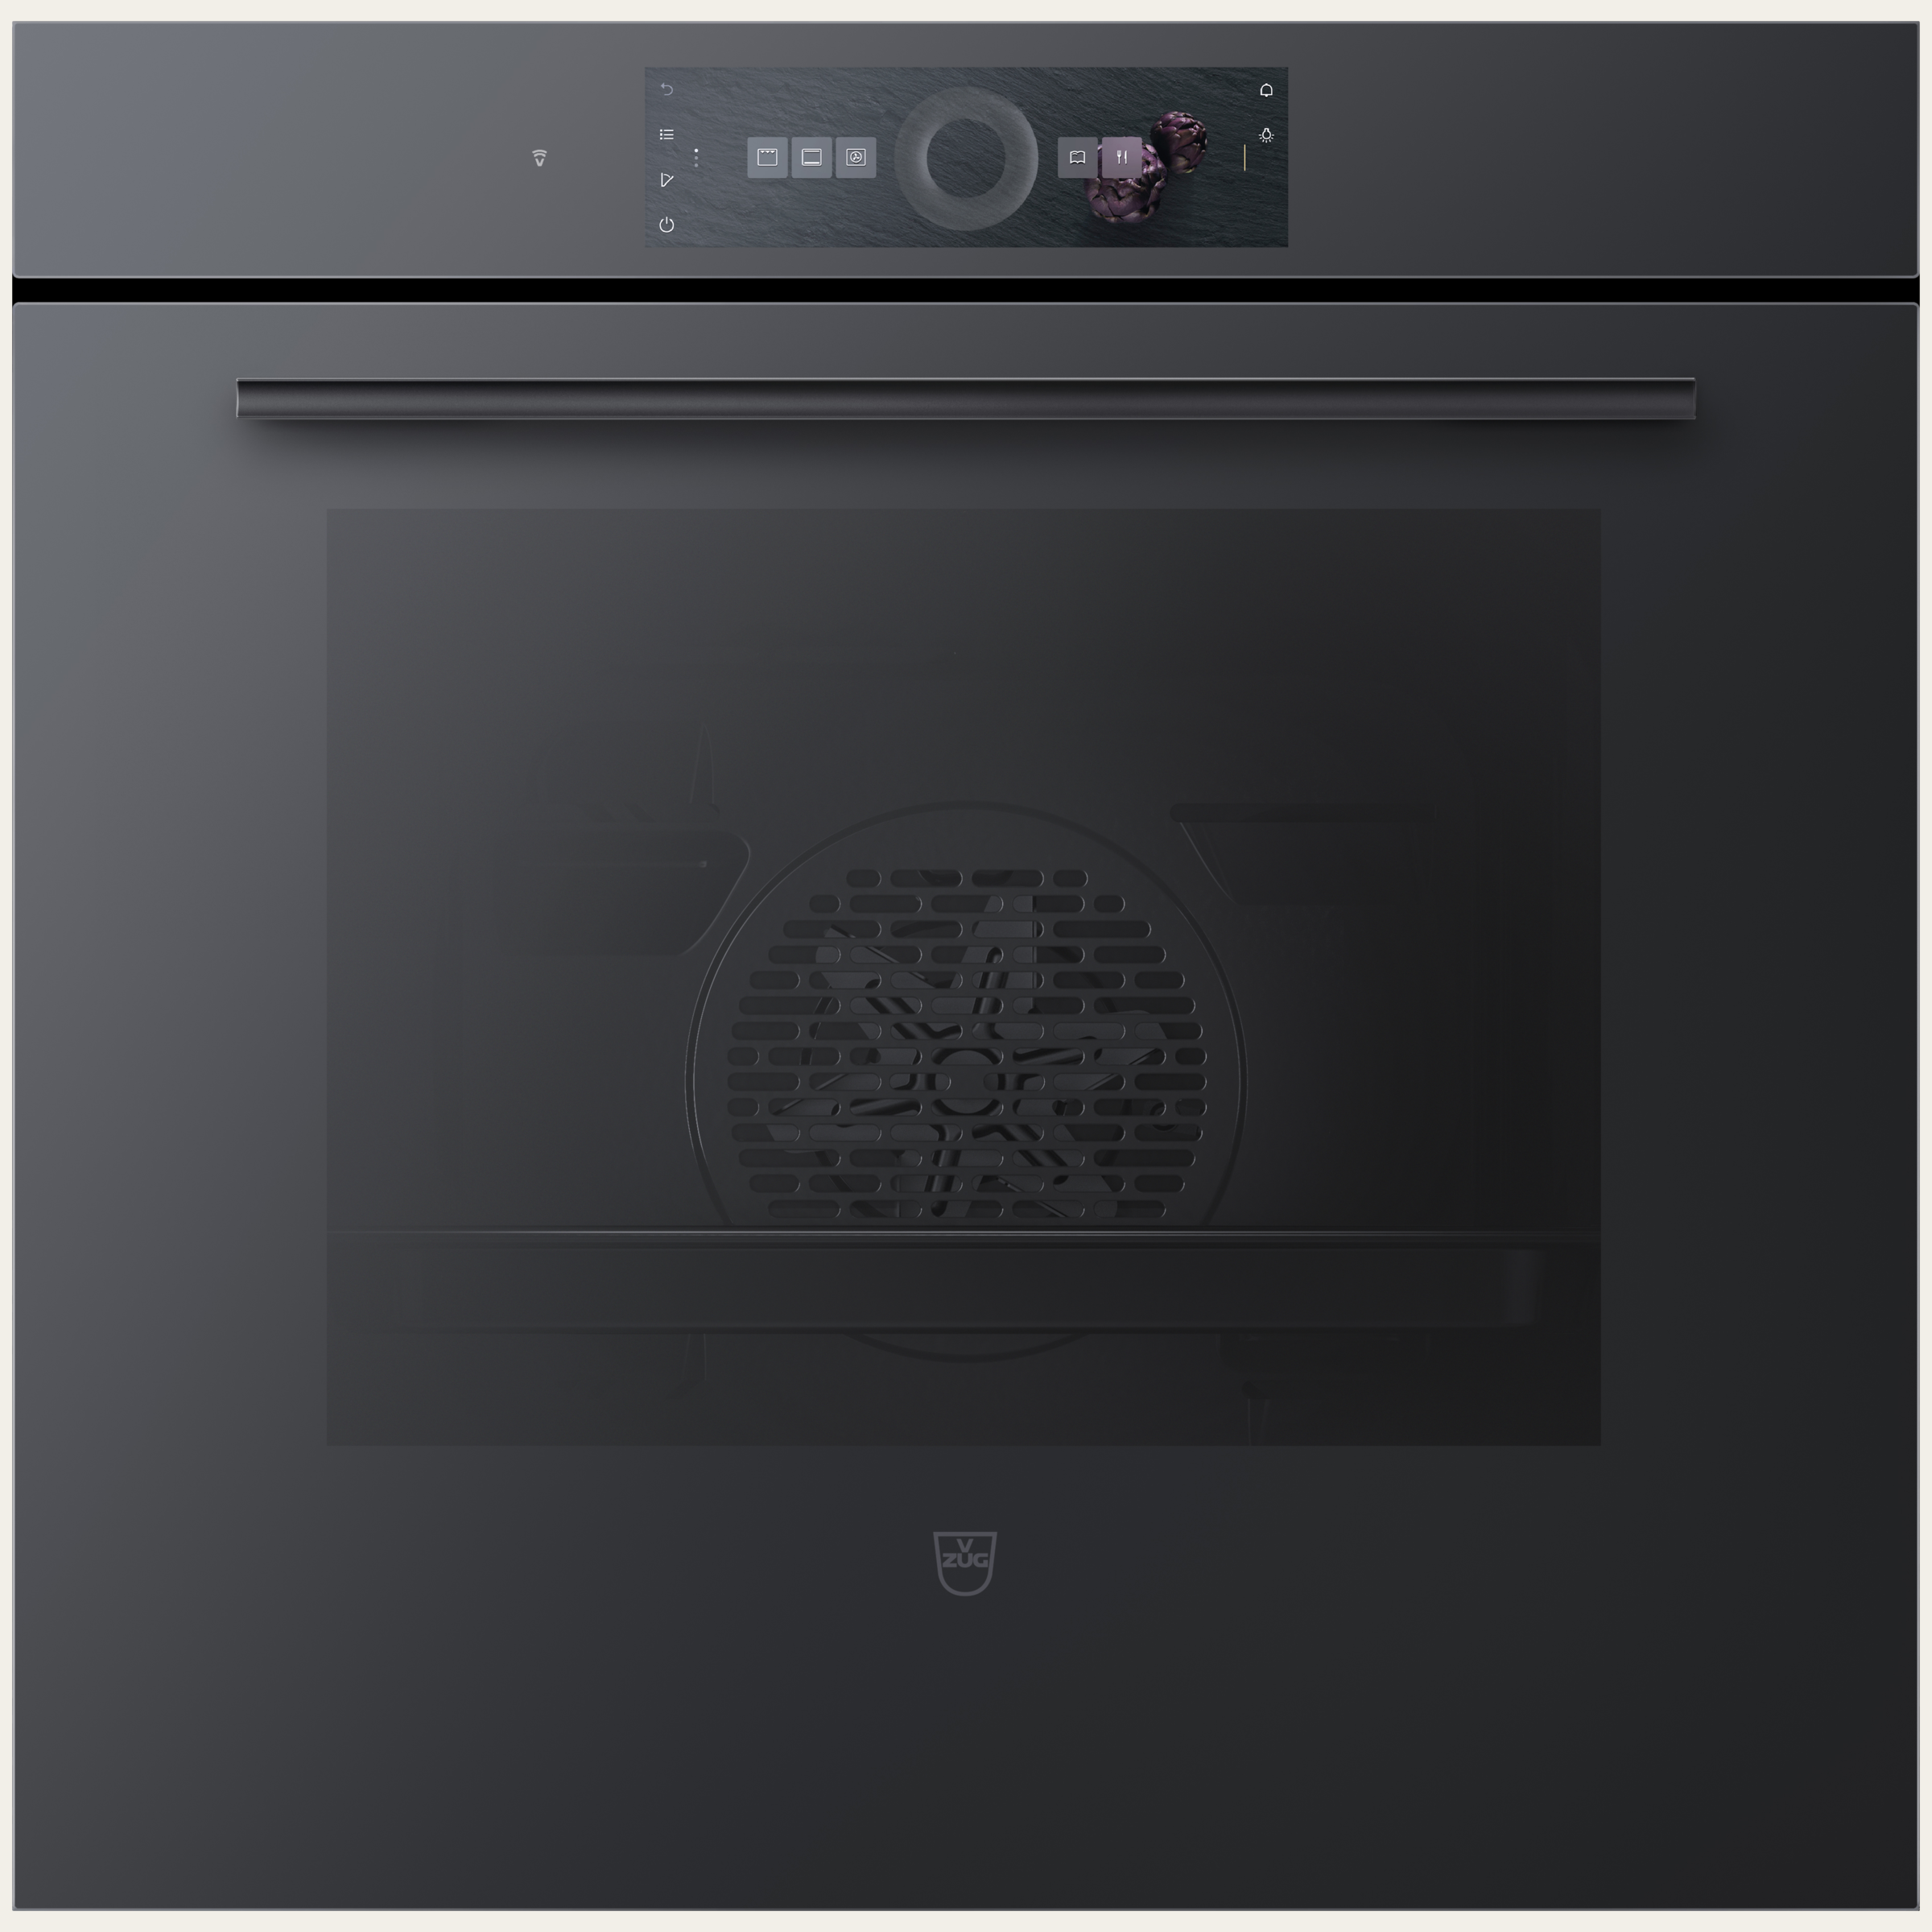 V-ZUG Oven Combair V6000 60P, Standard width: 60 cm,Standard height: 60 cm, Black mirror glass, Touchscreen with CircleSlider, V-ZUG-Home, Pyrolytic self-cleaning